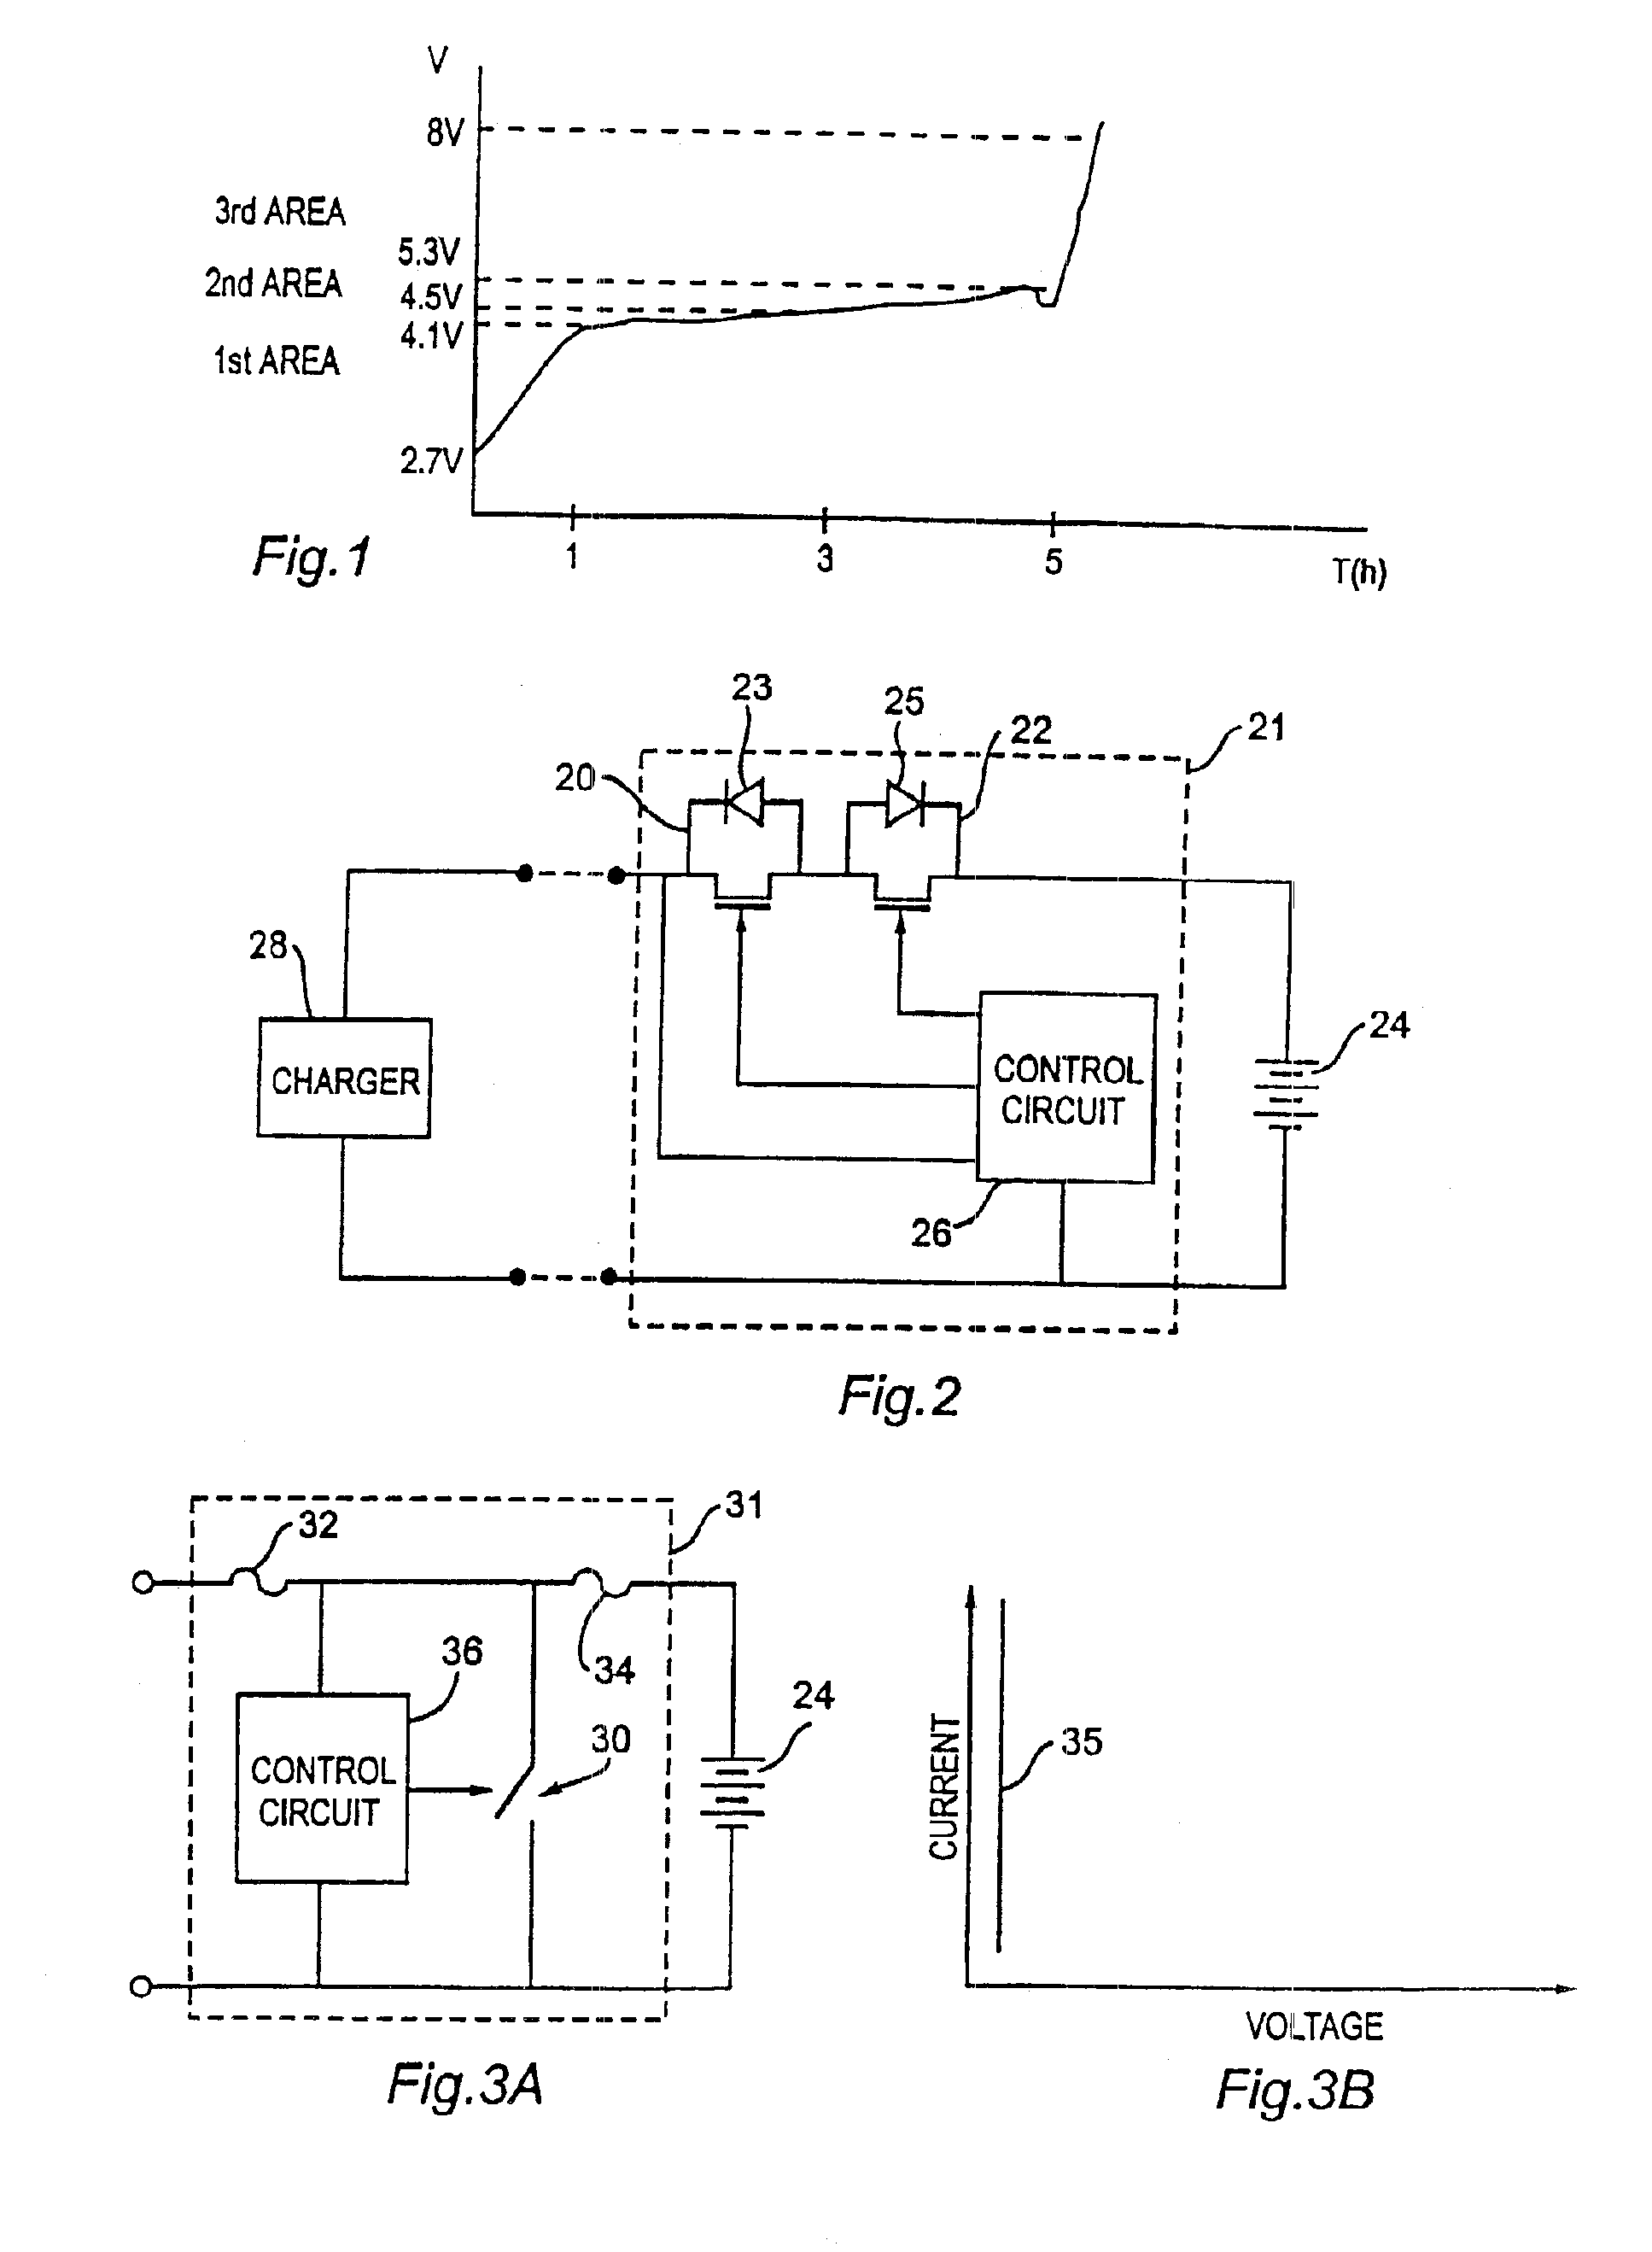 Electrical device including a voltage regulator mounted on a variable resistor